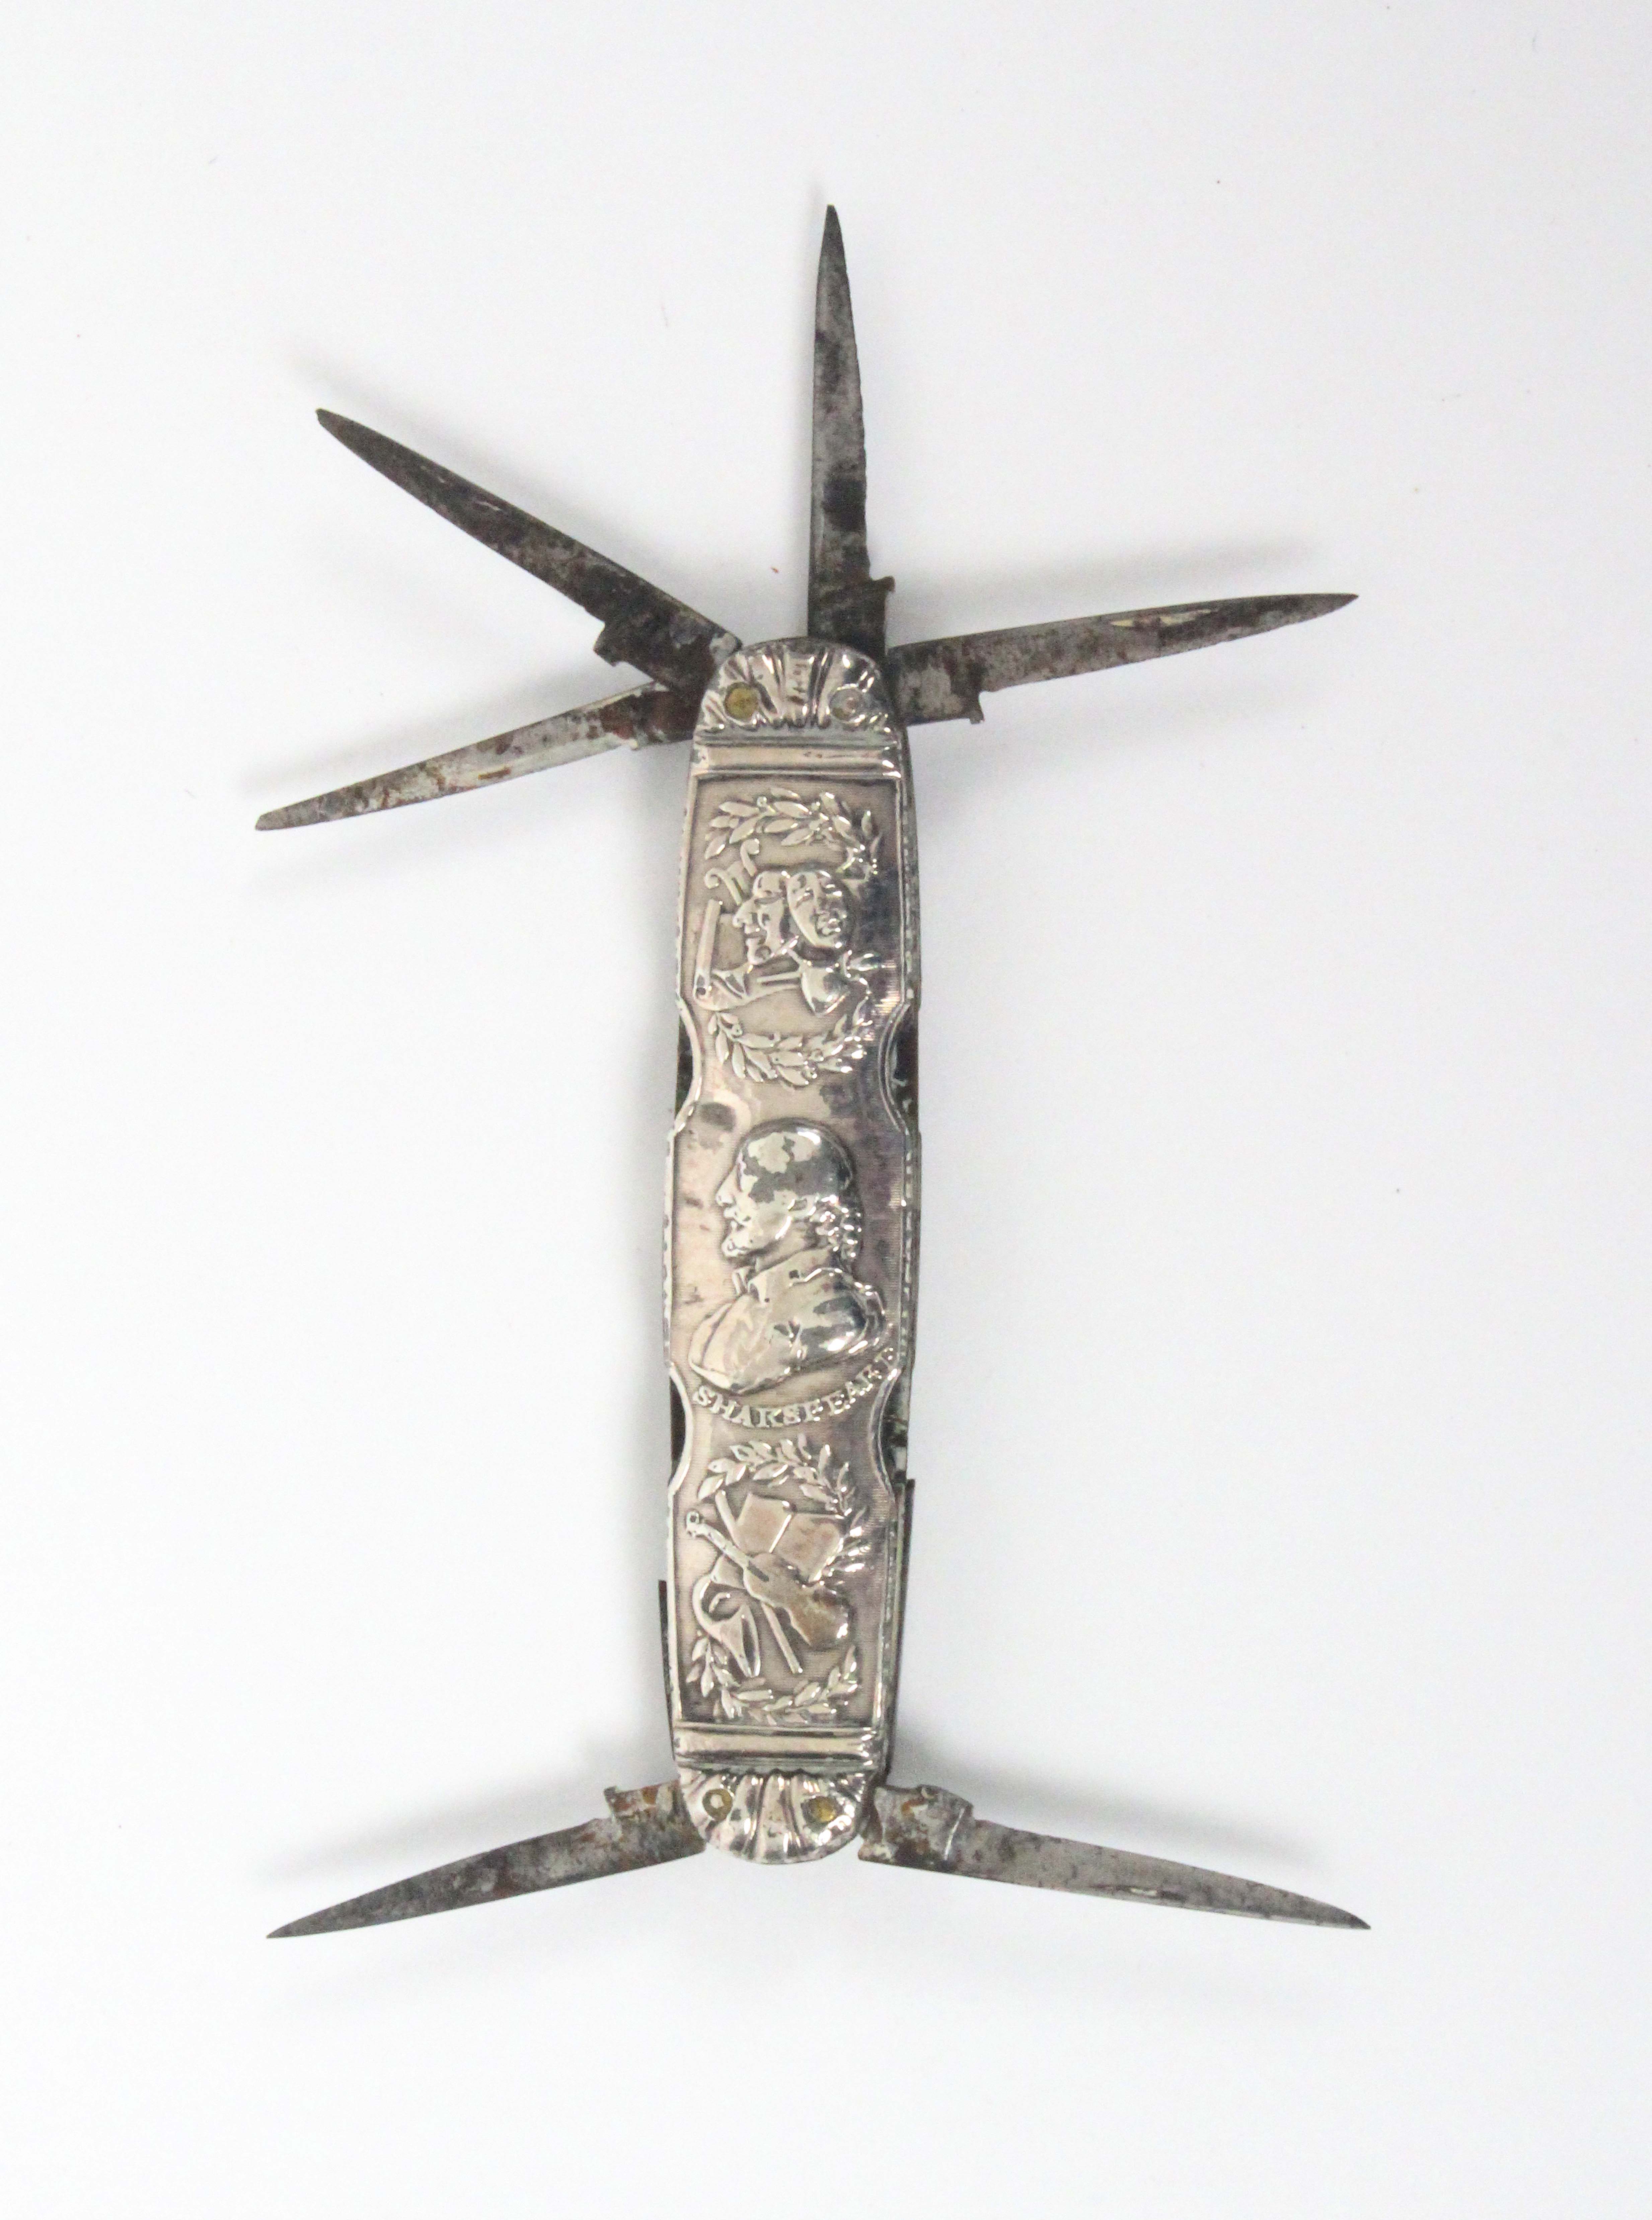 A late 18th century pocket knife commemorating Shakespeare probably produced for David Garrick’s